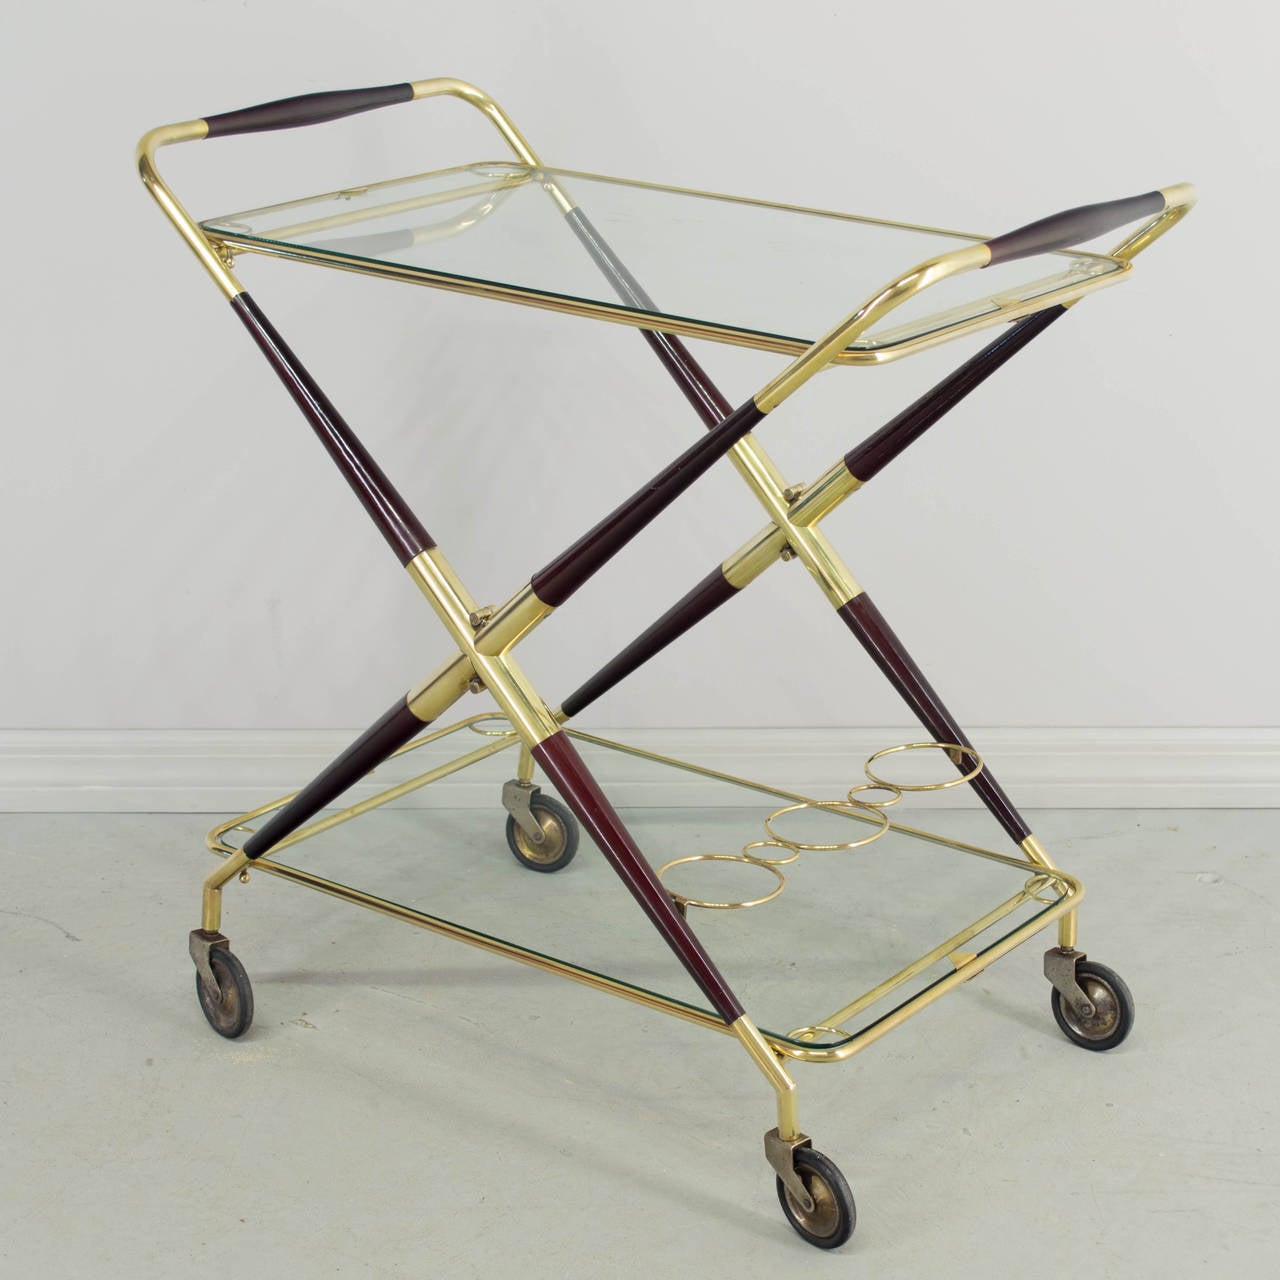 Mid-Century Italian bar cart by Cesare Lacca. A very nice high quality drinks trolley made of brass and rosewood with removable glass trays. This cart is hinged and can be folded for easy storage. Superb design and well-made. Original wheels glide